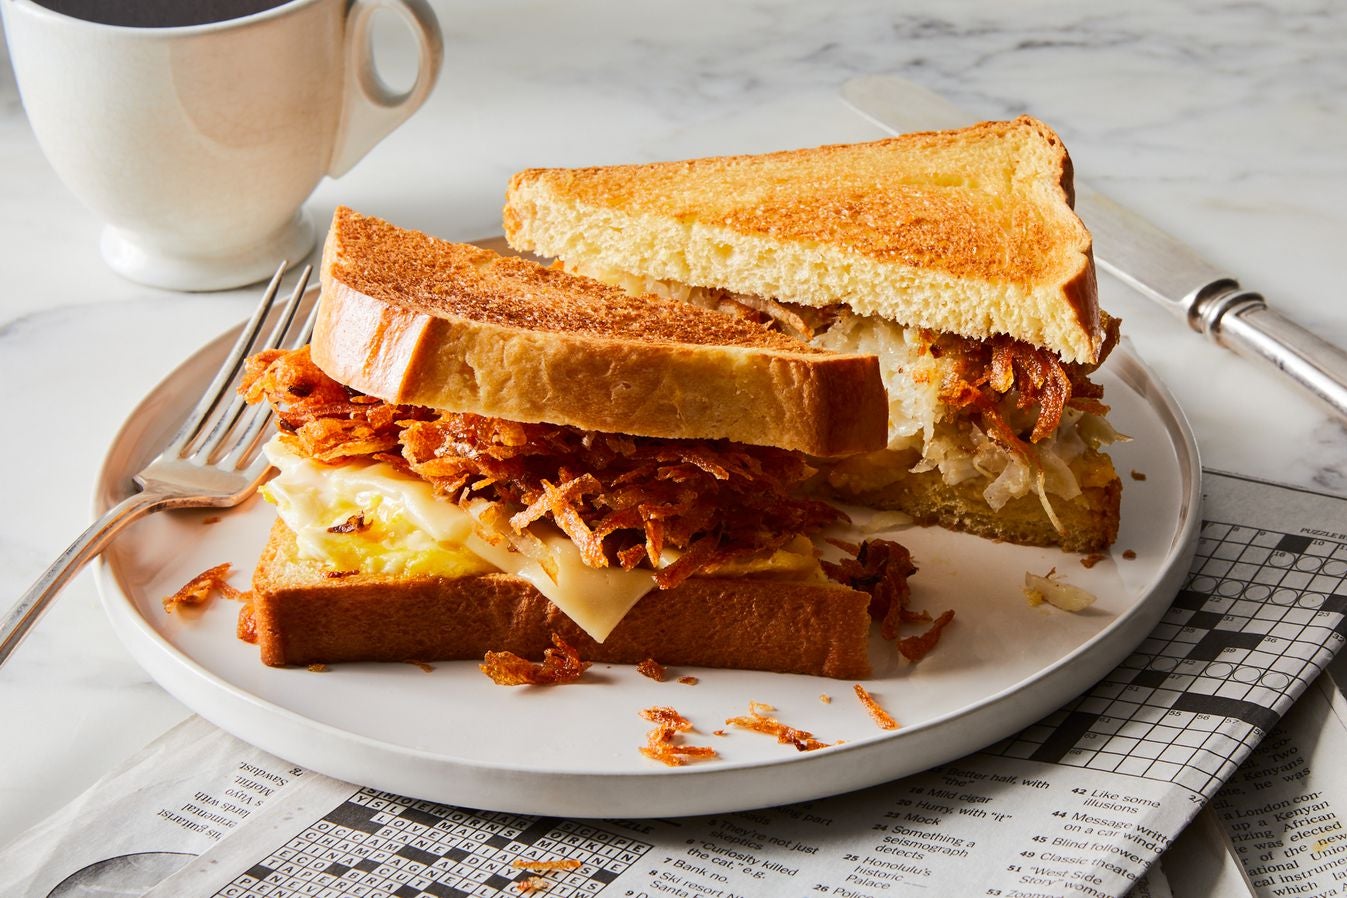 Latke, egg, and cheese sandwich sliced into triangles on a plate with a newspaper crossword folded under it and a coffee cup on the table beside it.